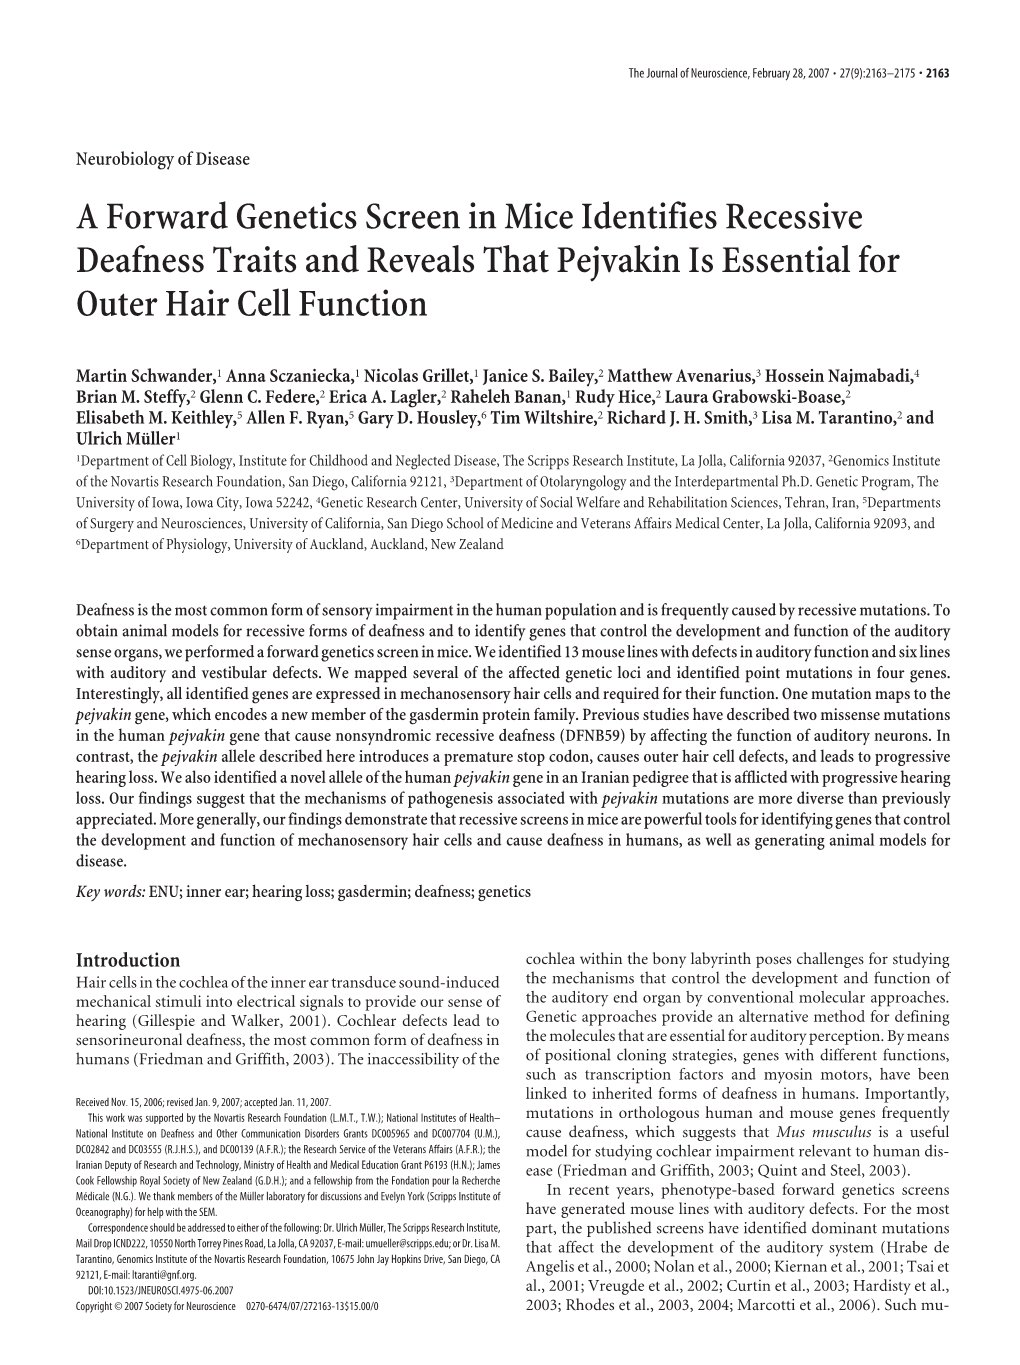 A Forward Genetics Screen in Mice Identifies Recessive Deafness Traits and Reveals That Pejvakin Is Essential for Outer Hair Cell Function